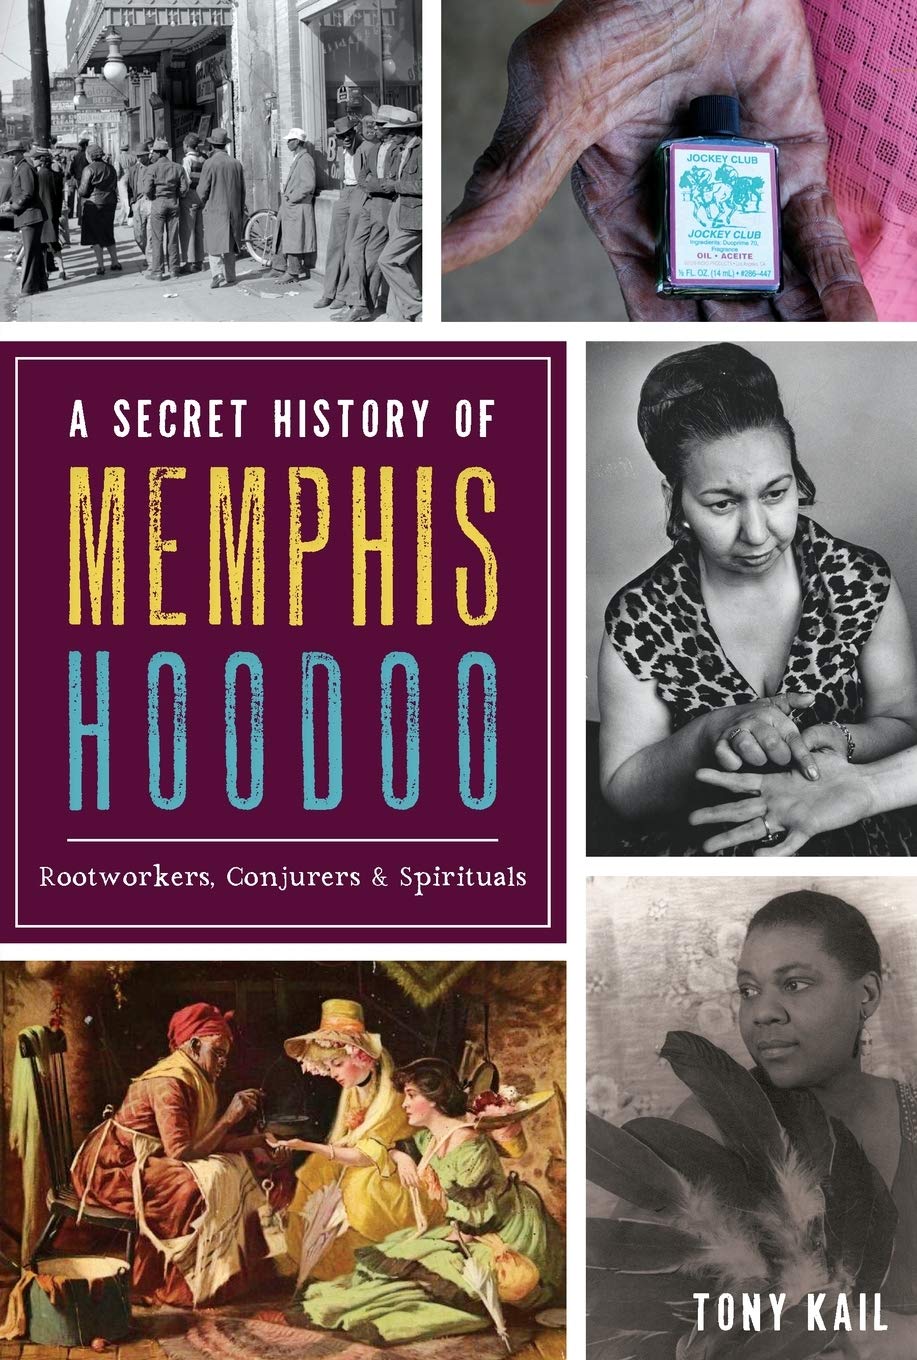 A Secret History of Memphis Hoodoo: Rootworkers, Conjurers & Spirituals by Tony Kail